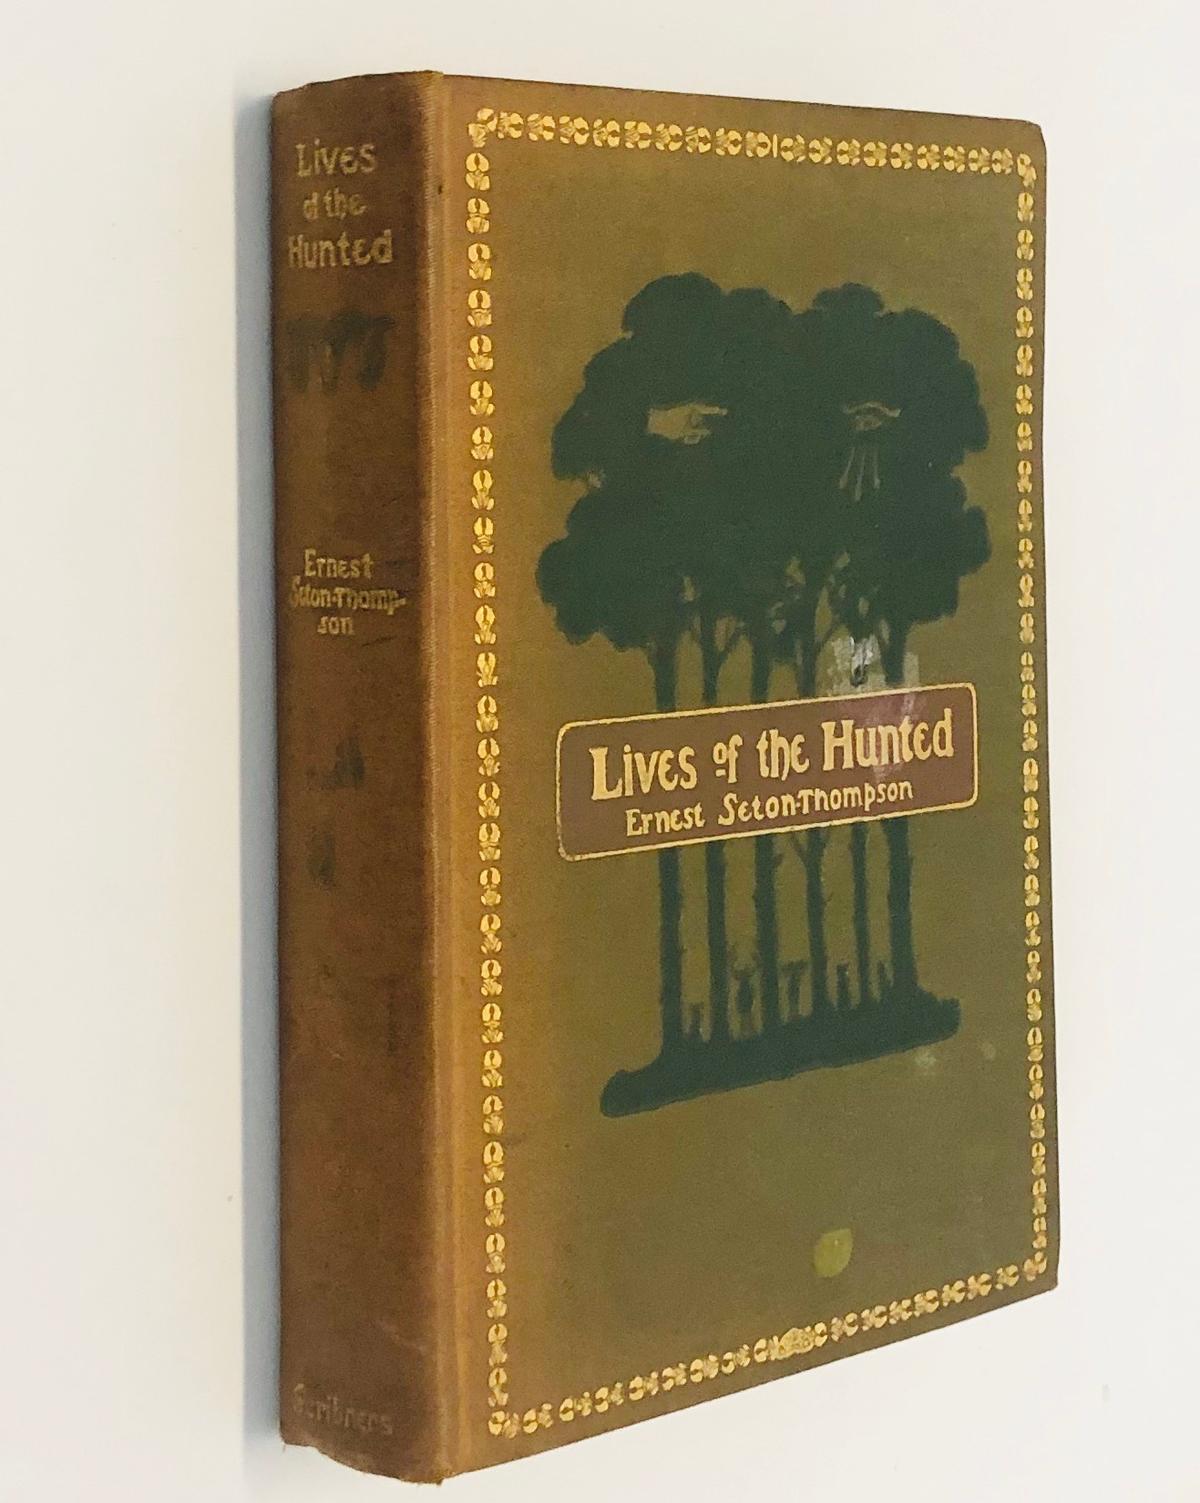 Lives of the Hunted by Ernest Seton-Thompson (1901)